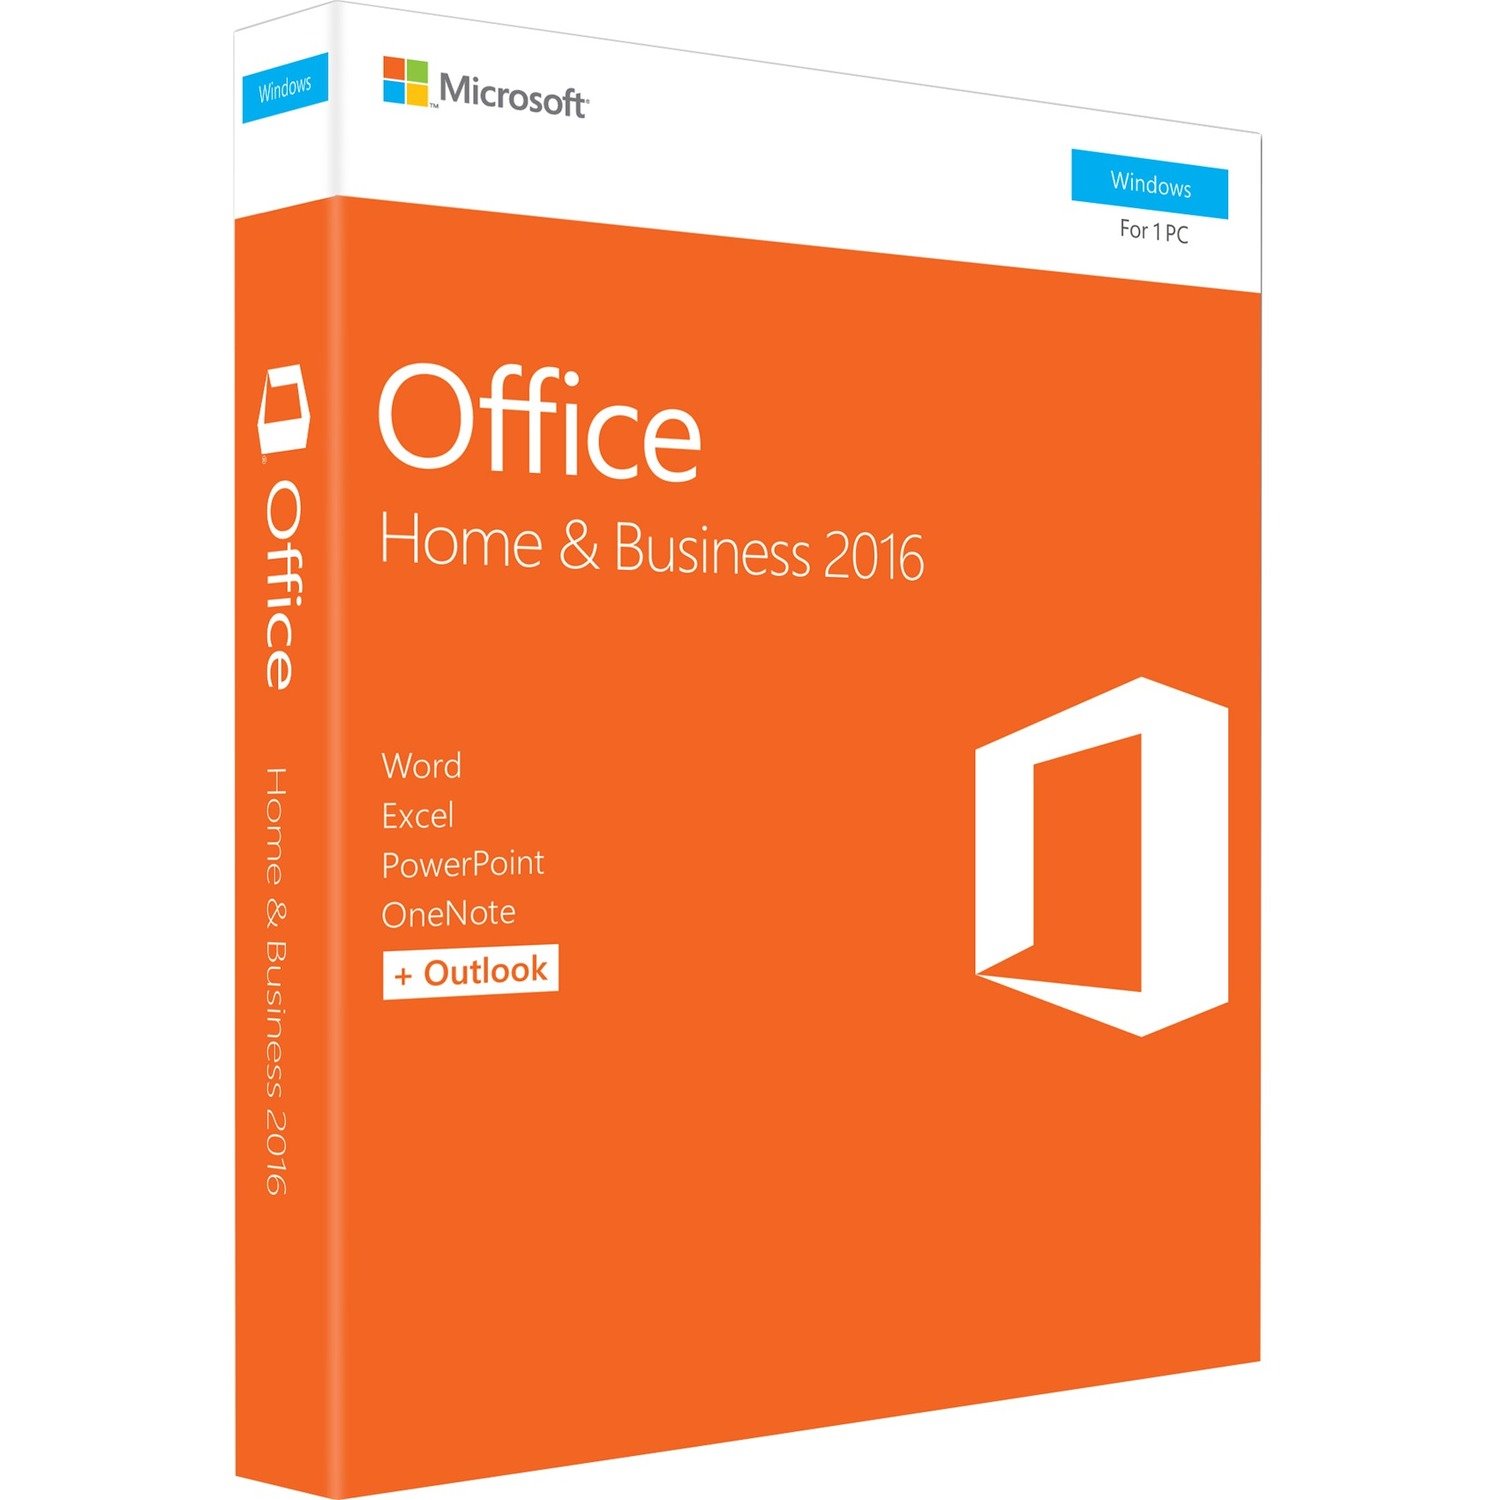 Microsoft Office 2016 Home & Business + Outlook - 1 PC